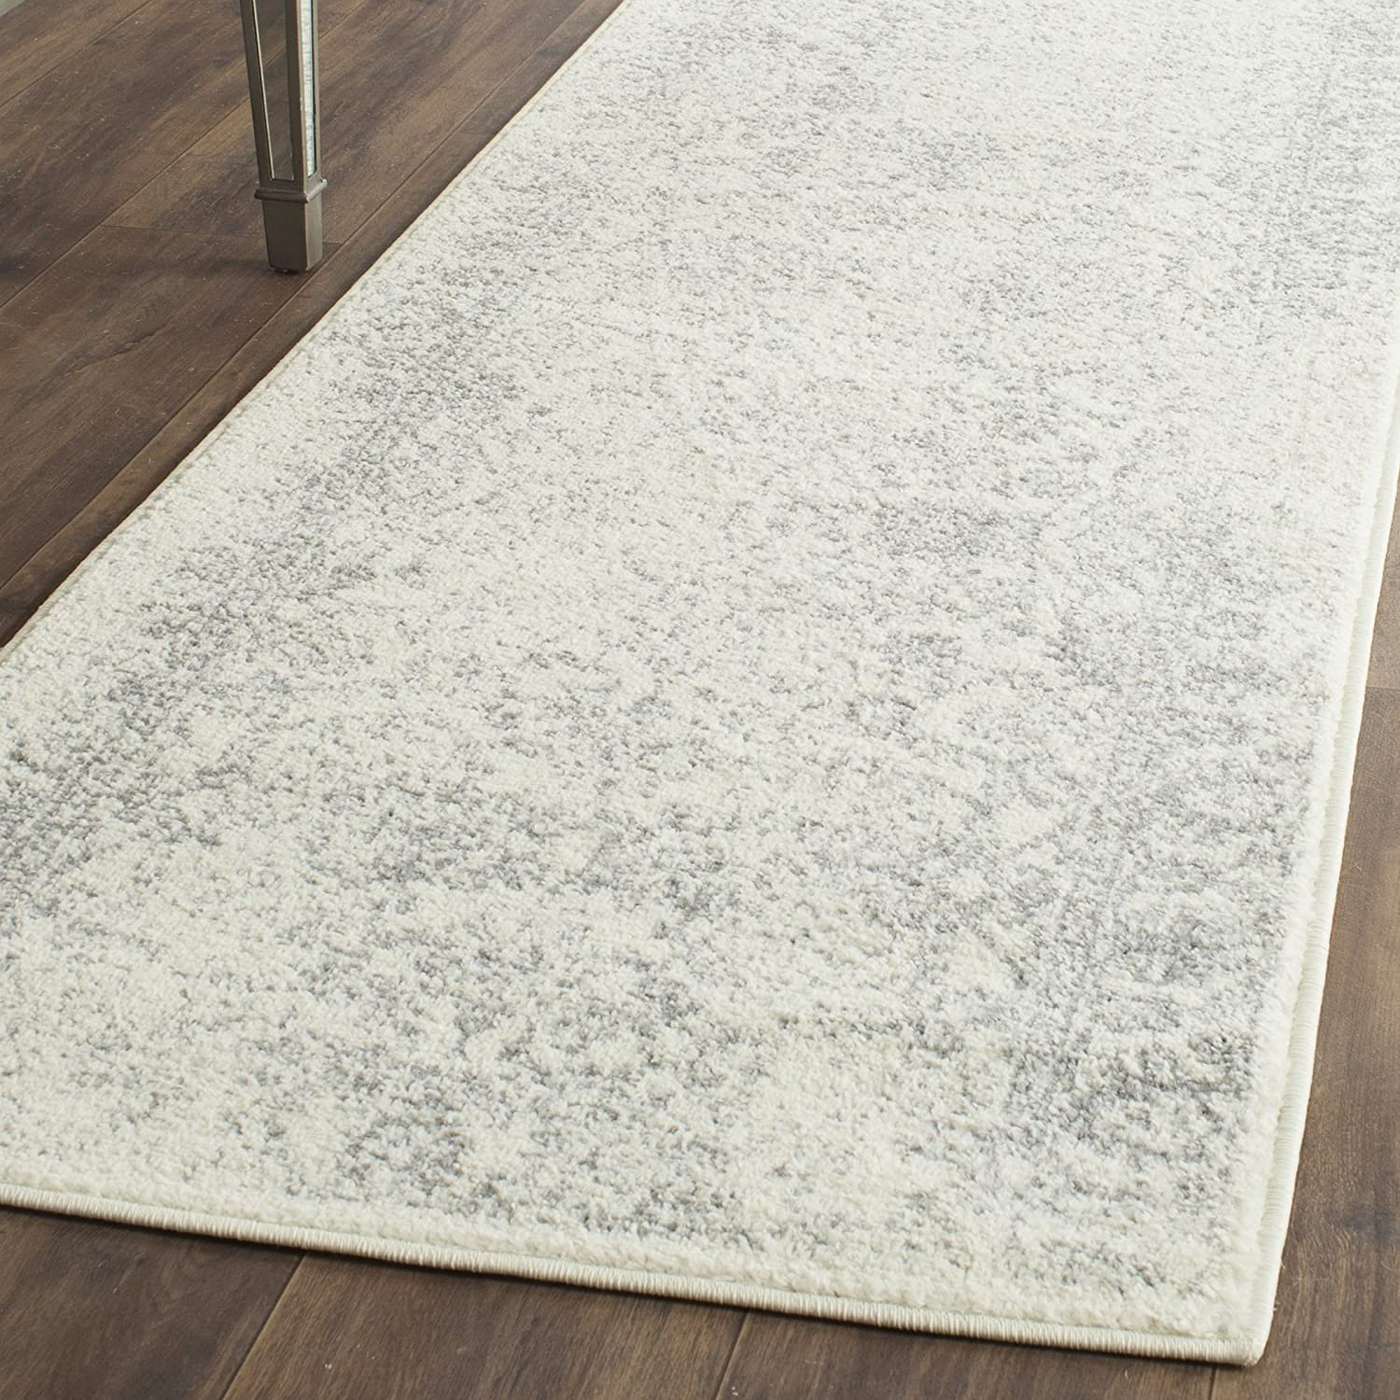 Safavieh Adirondack Collection ADR109C Oriental Distressed Non-Shedding Stain Resistant Living Room Bedroom Runner, 2'6" x 18' , Ivory / Silver